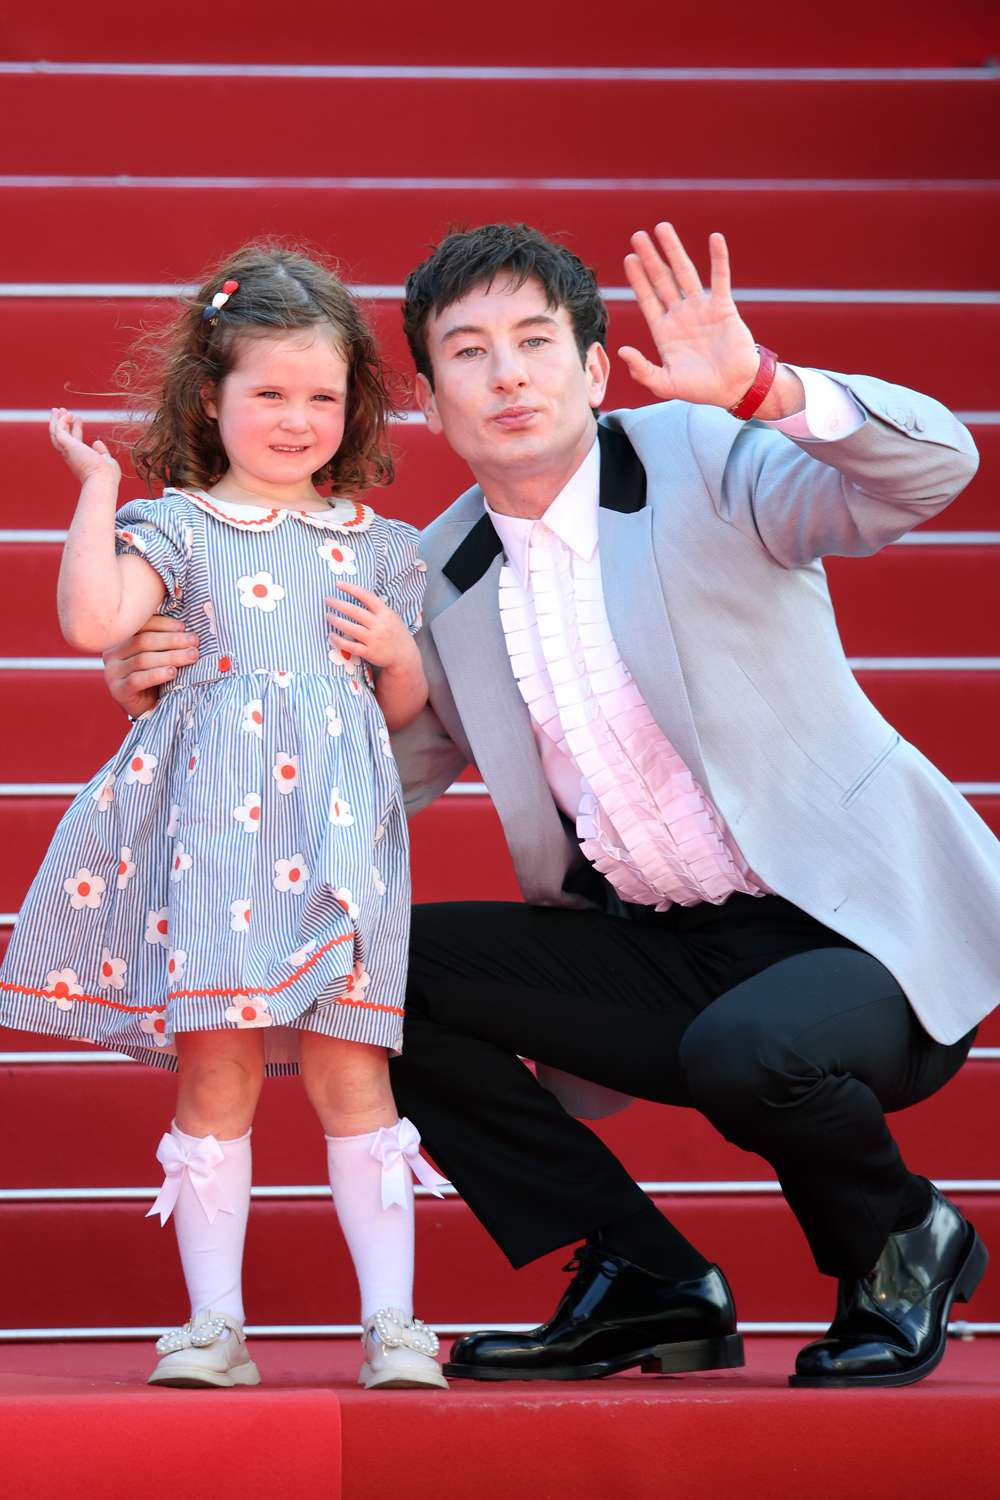 Jackie Mellor and Barry Keoghan attend the "Bird" Red Carpet at the 77th annual Cannes Film Festival at Palais des 